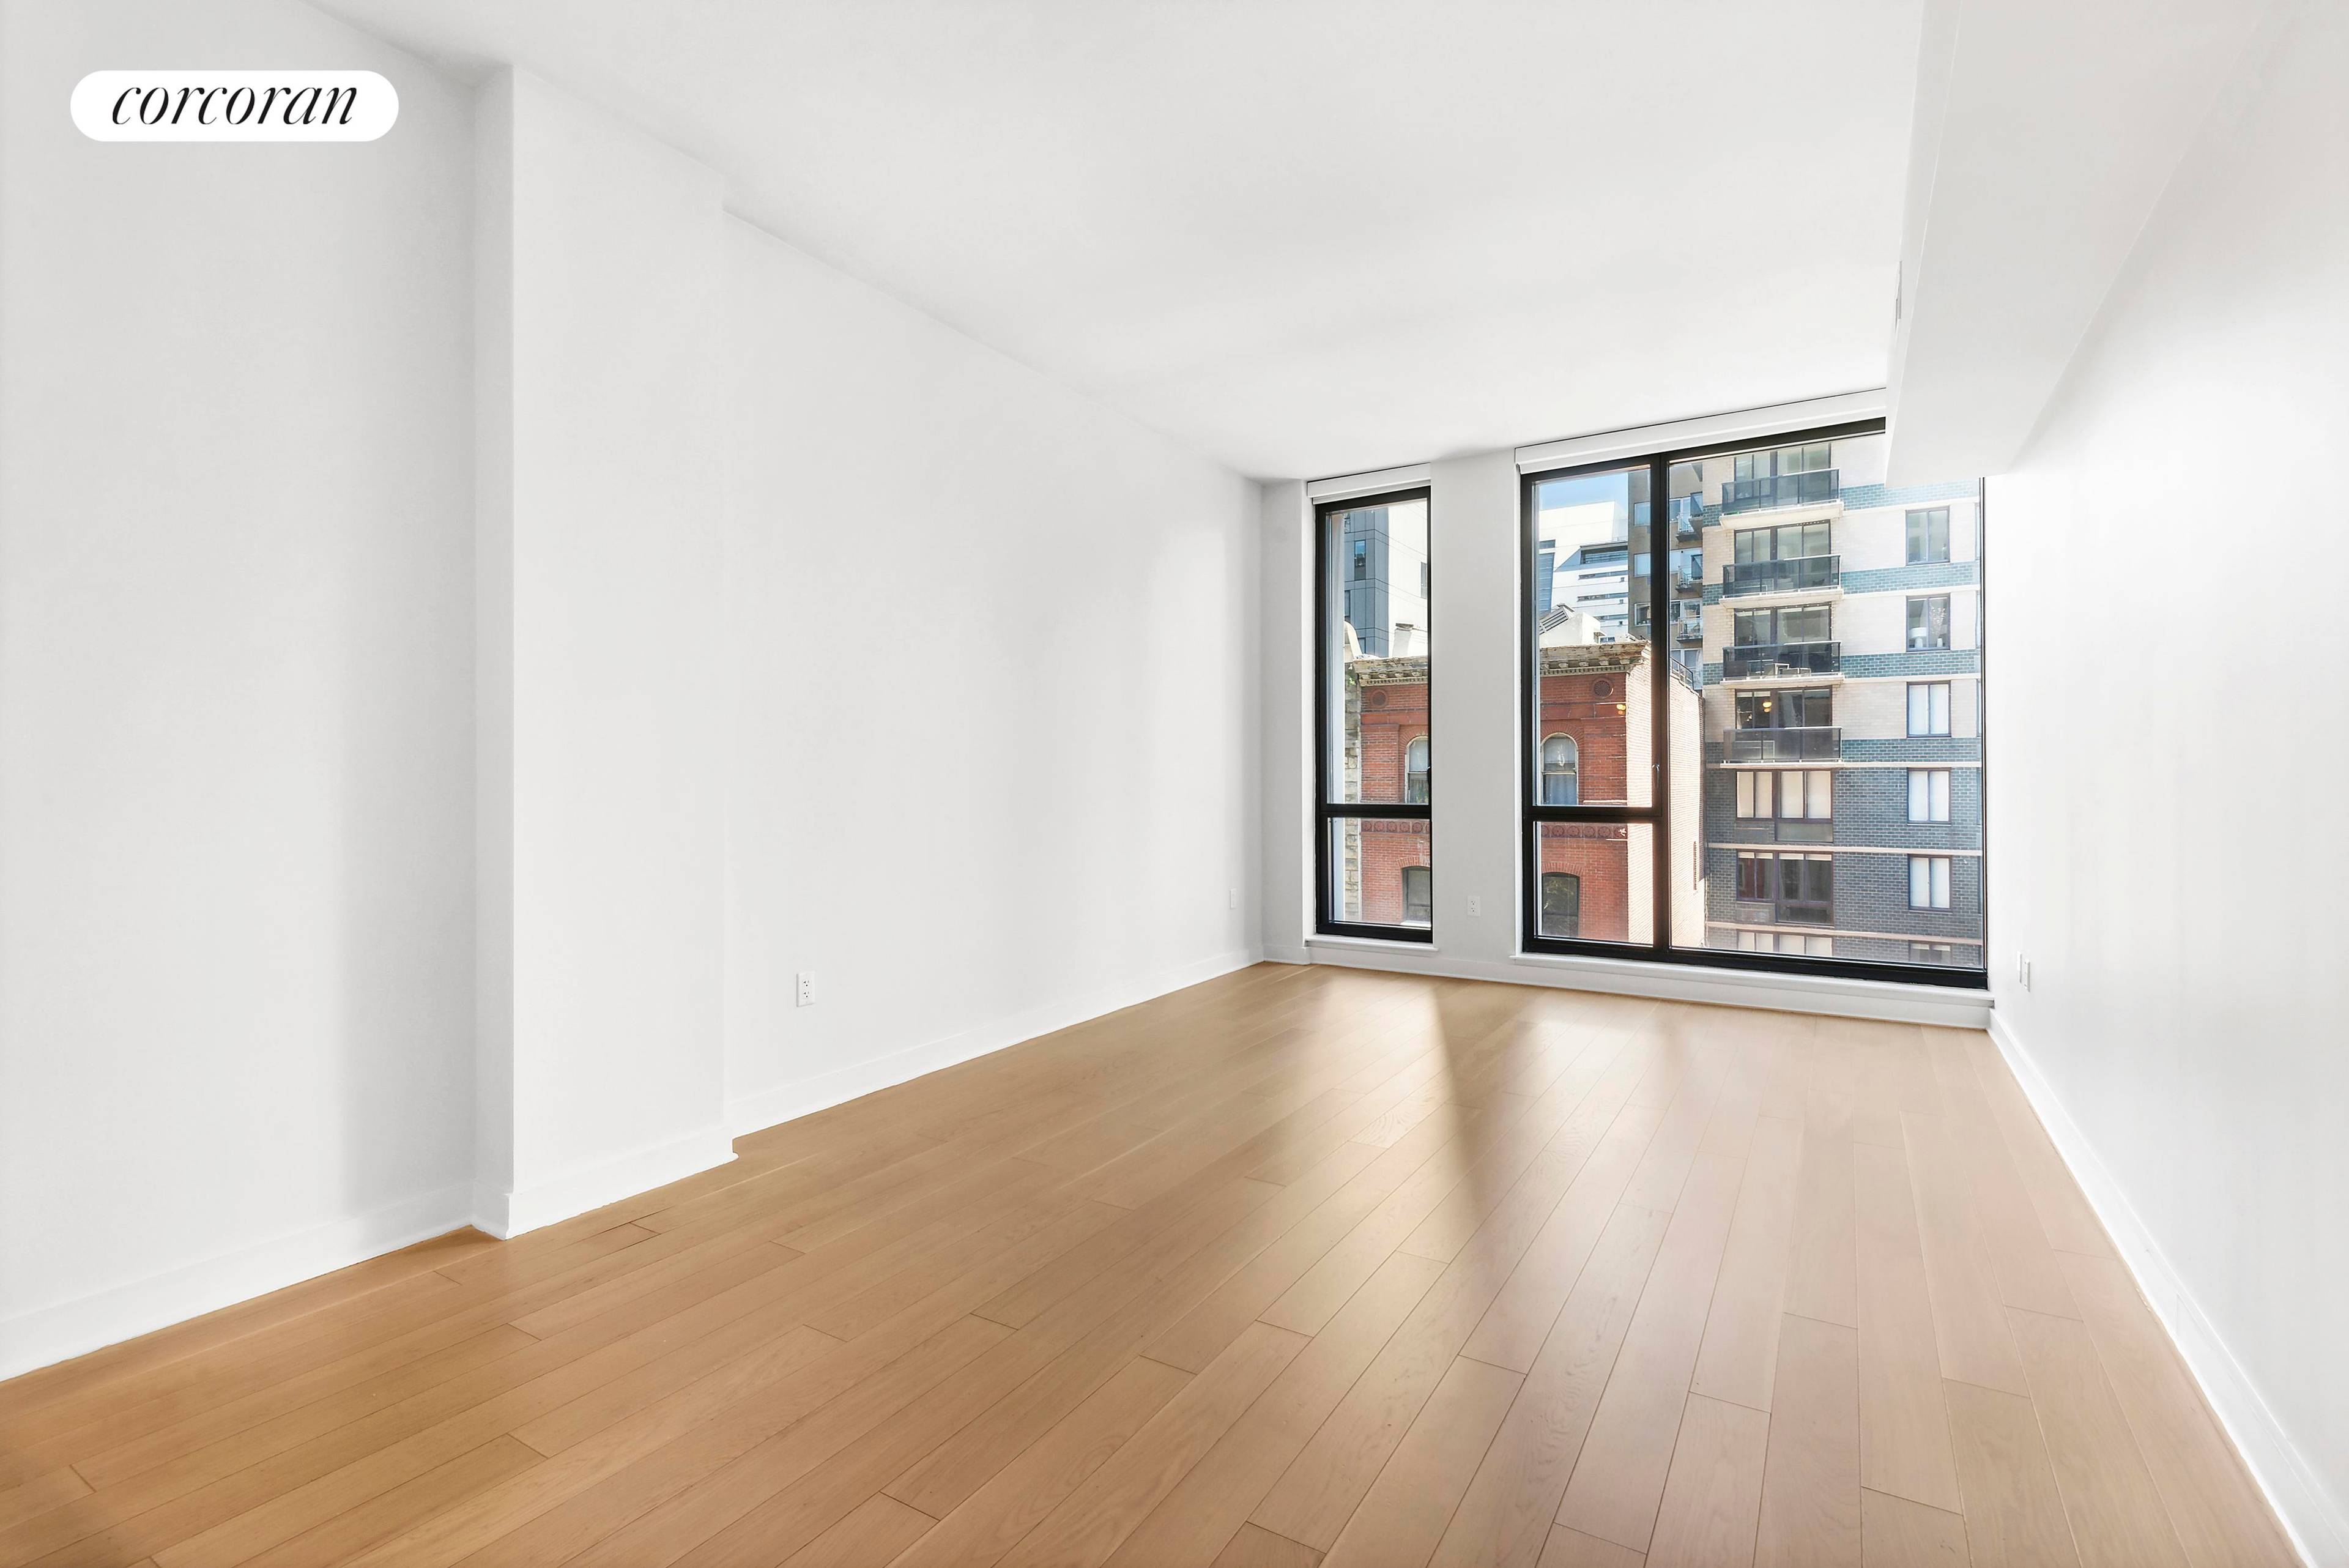 Application Pending Welcome to Apartment 6A at 160 East 22nd Street, a spacious 1 bed 1 bath rental in the heart of Gramercy Park.